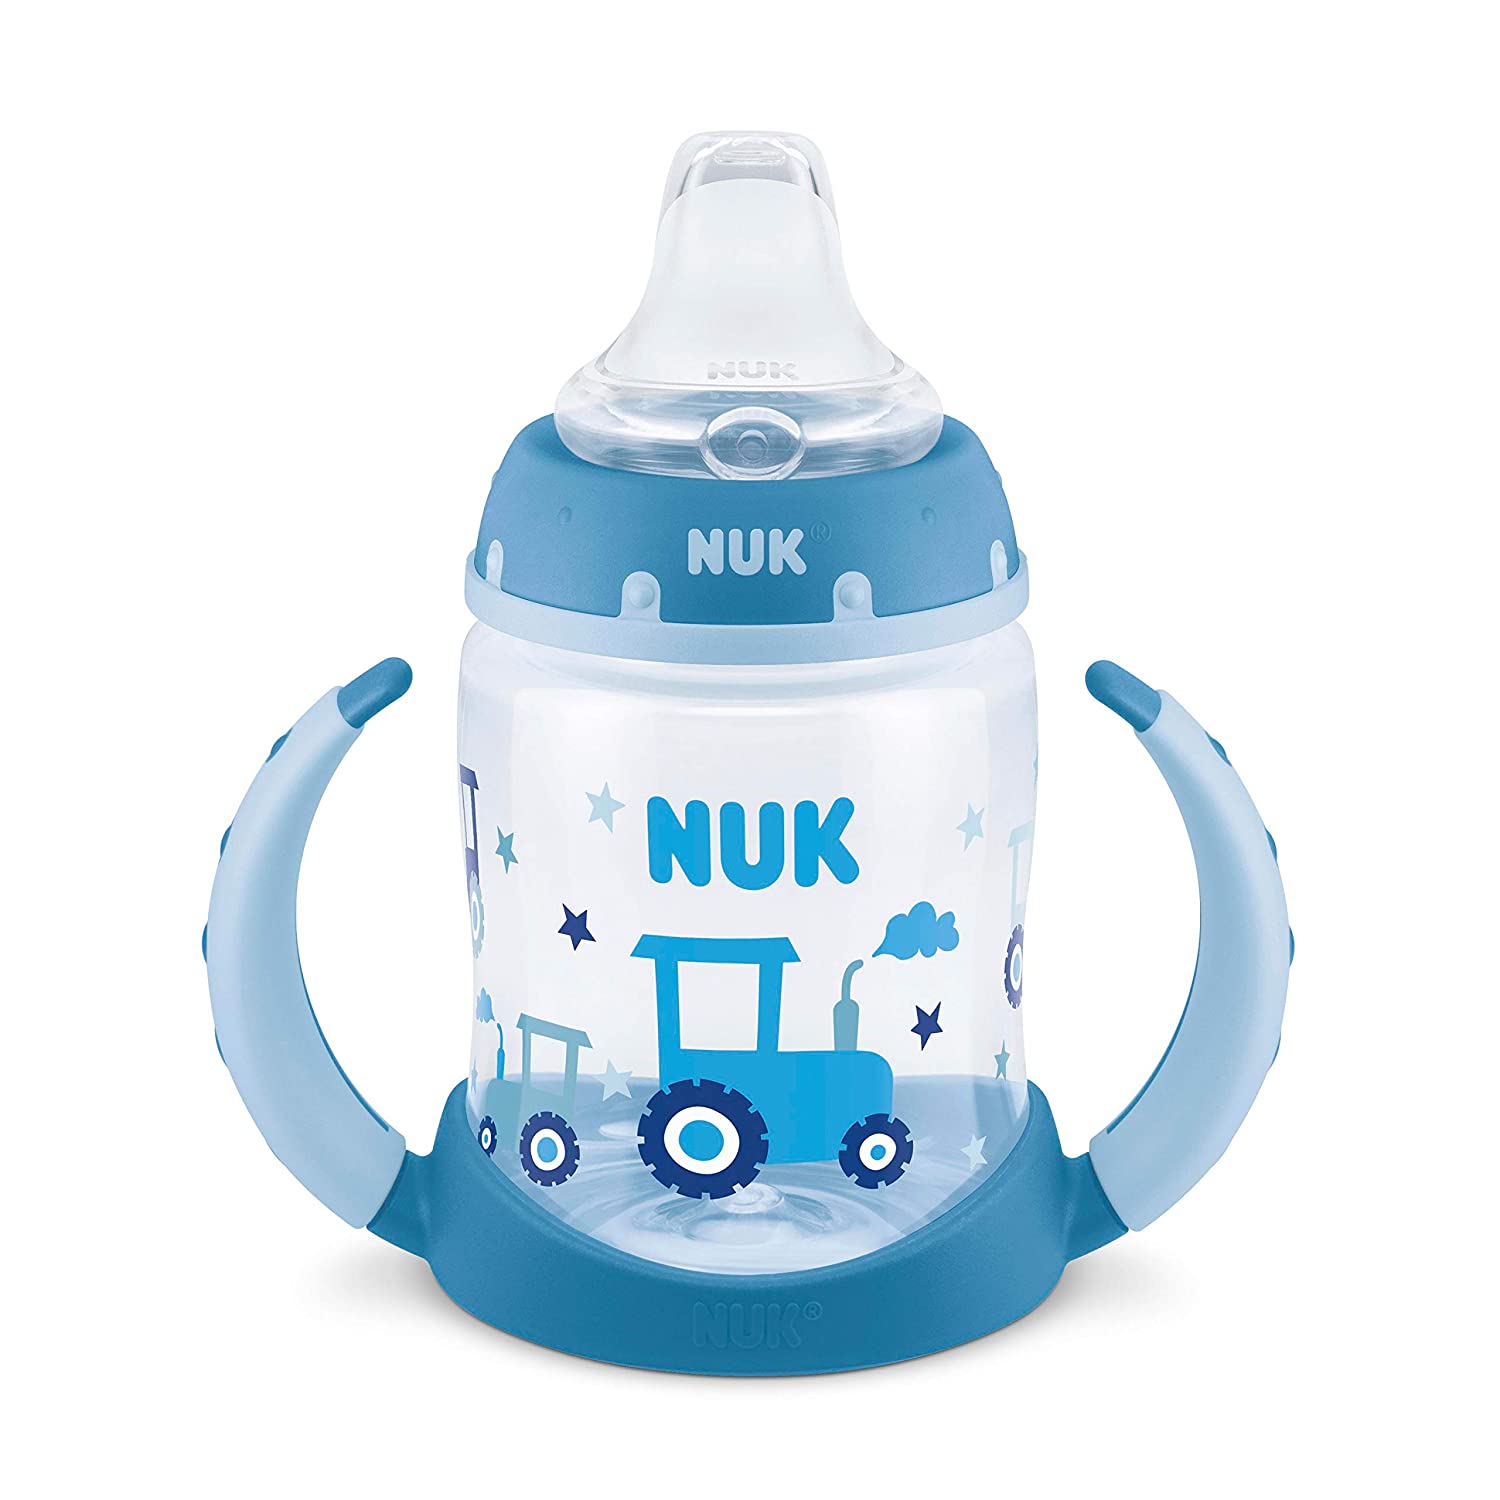 NUK Learner Tractor Sippy Cup